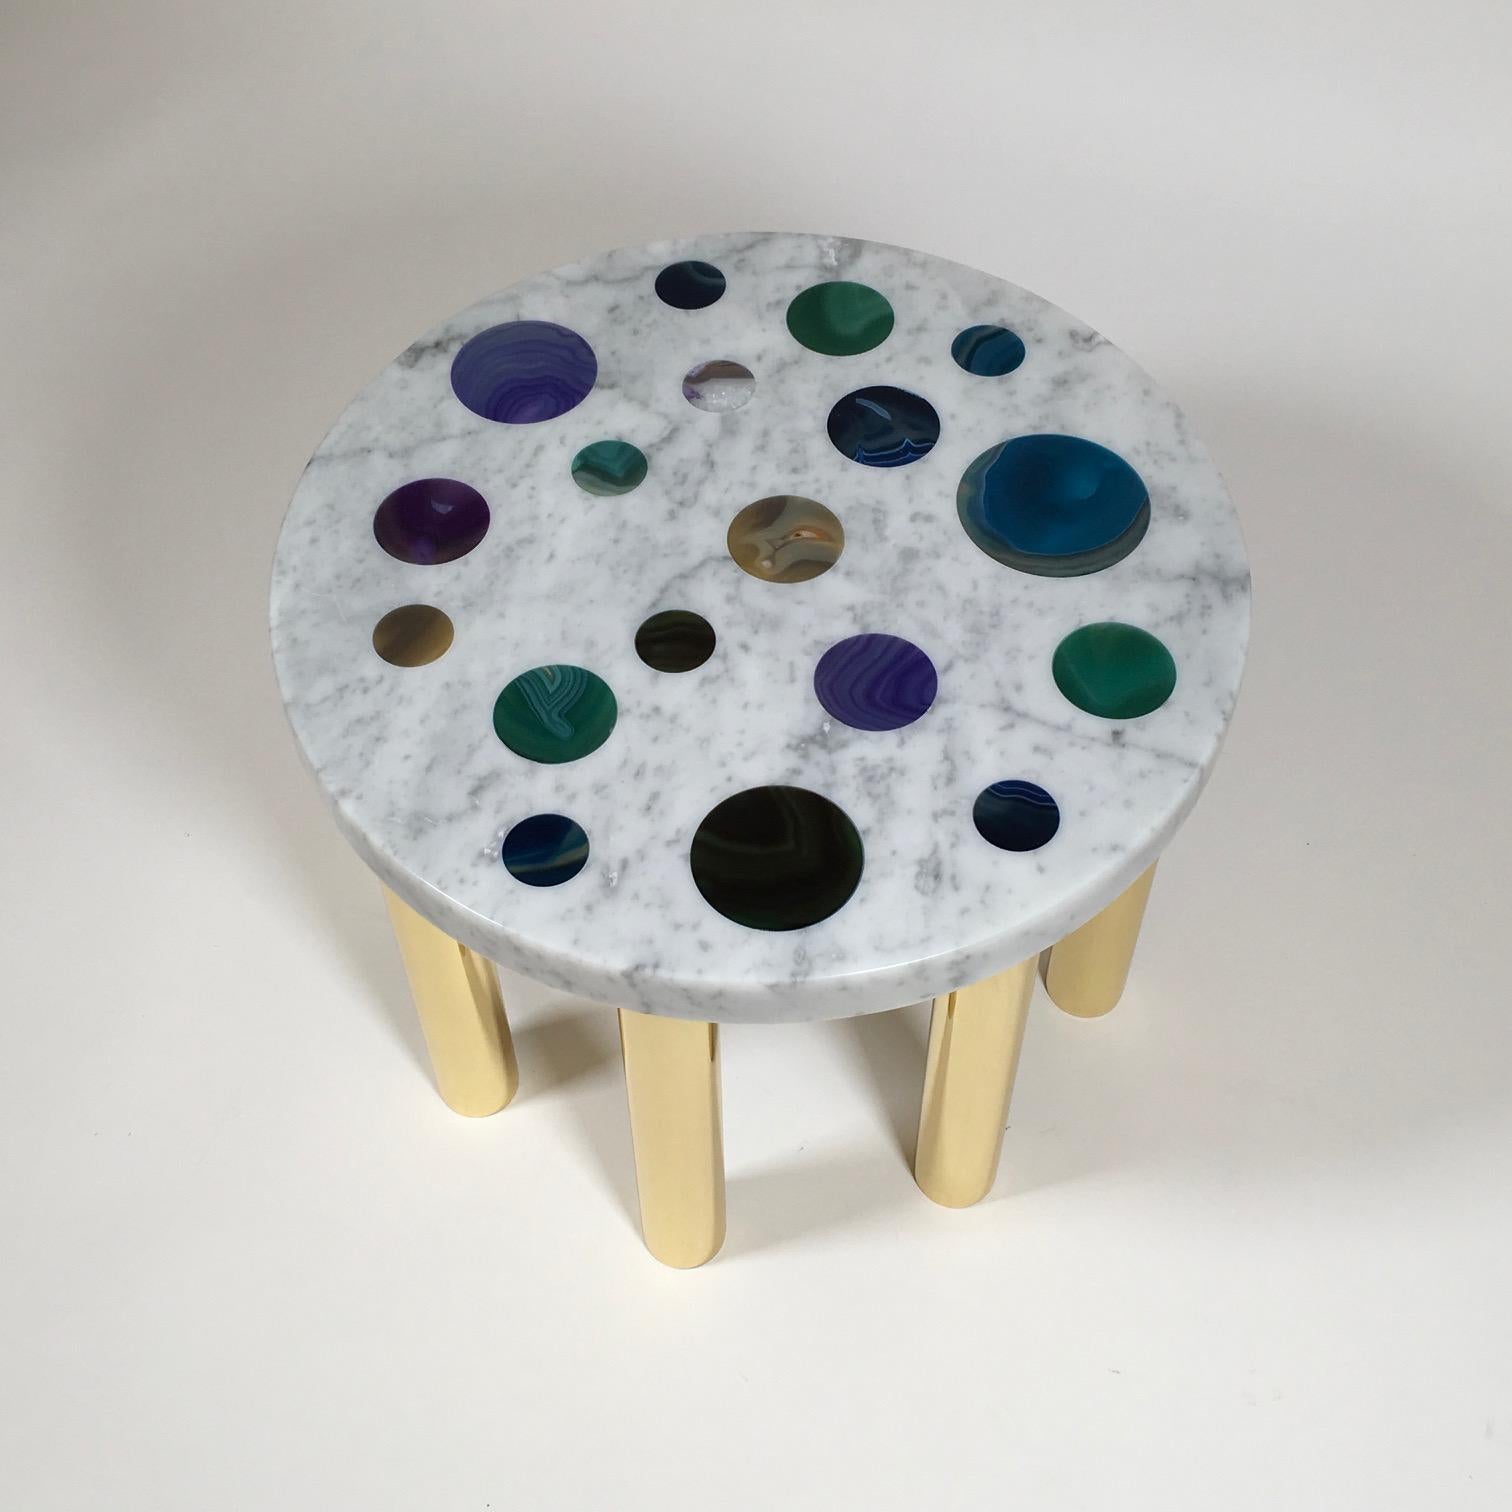 Coffee table model Cosmos in Carrara marble with agate disks of different colors and with 8 brass legs designed by Studio Superego for Superego Editions, in 2018.

Biography
Superego Editions was born in 2006, performing a constant activity of